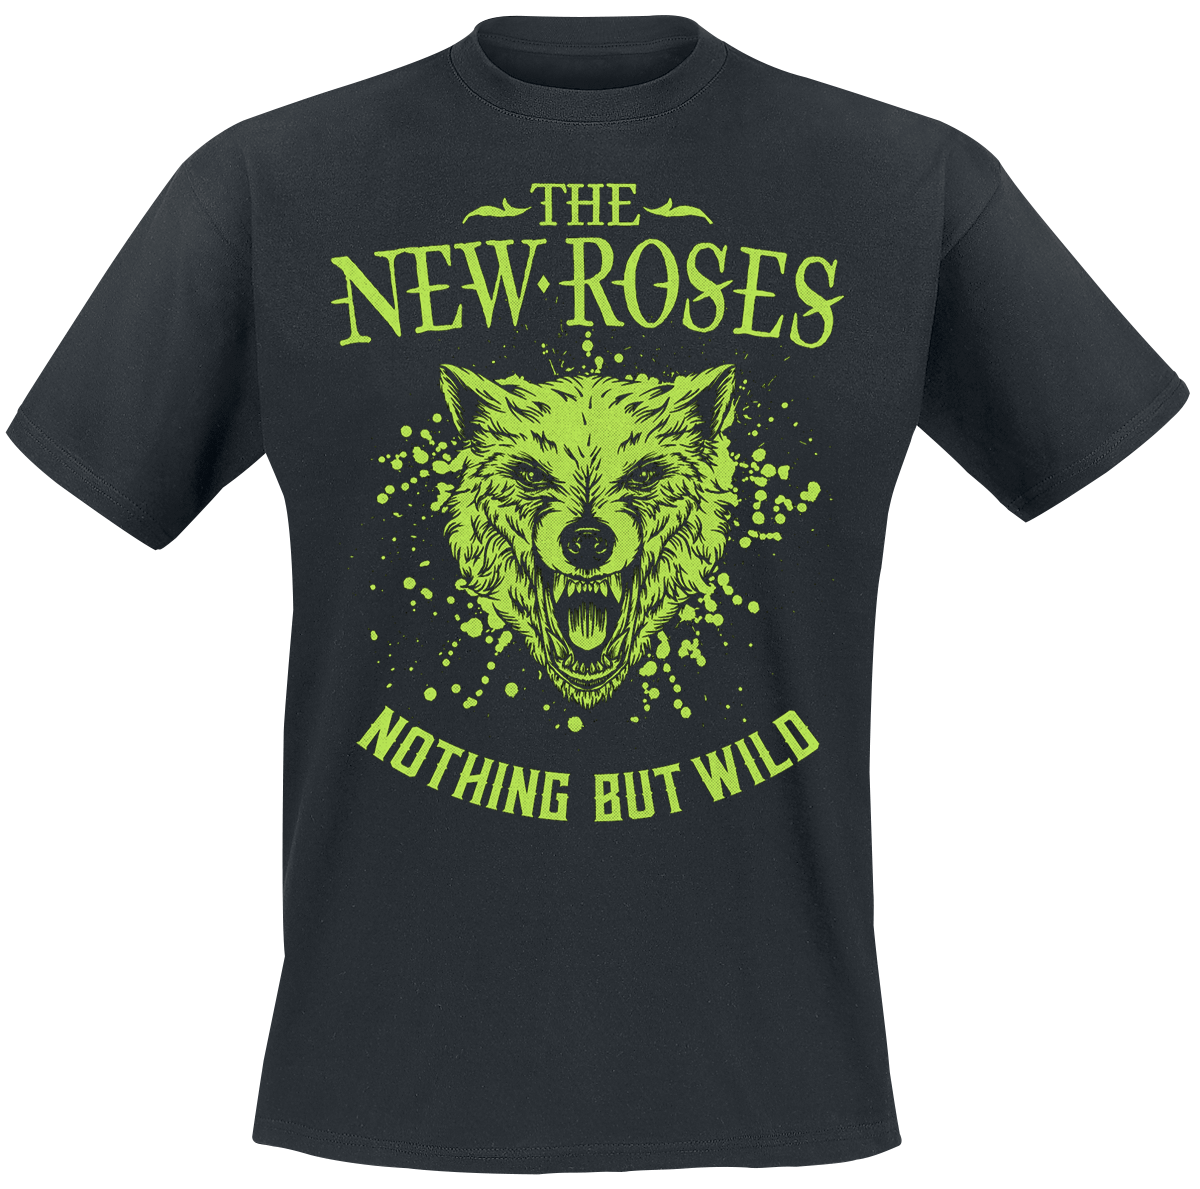 The New Roses - Nothing But Wild - T-Shirt - black image